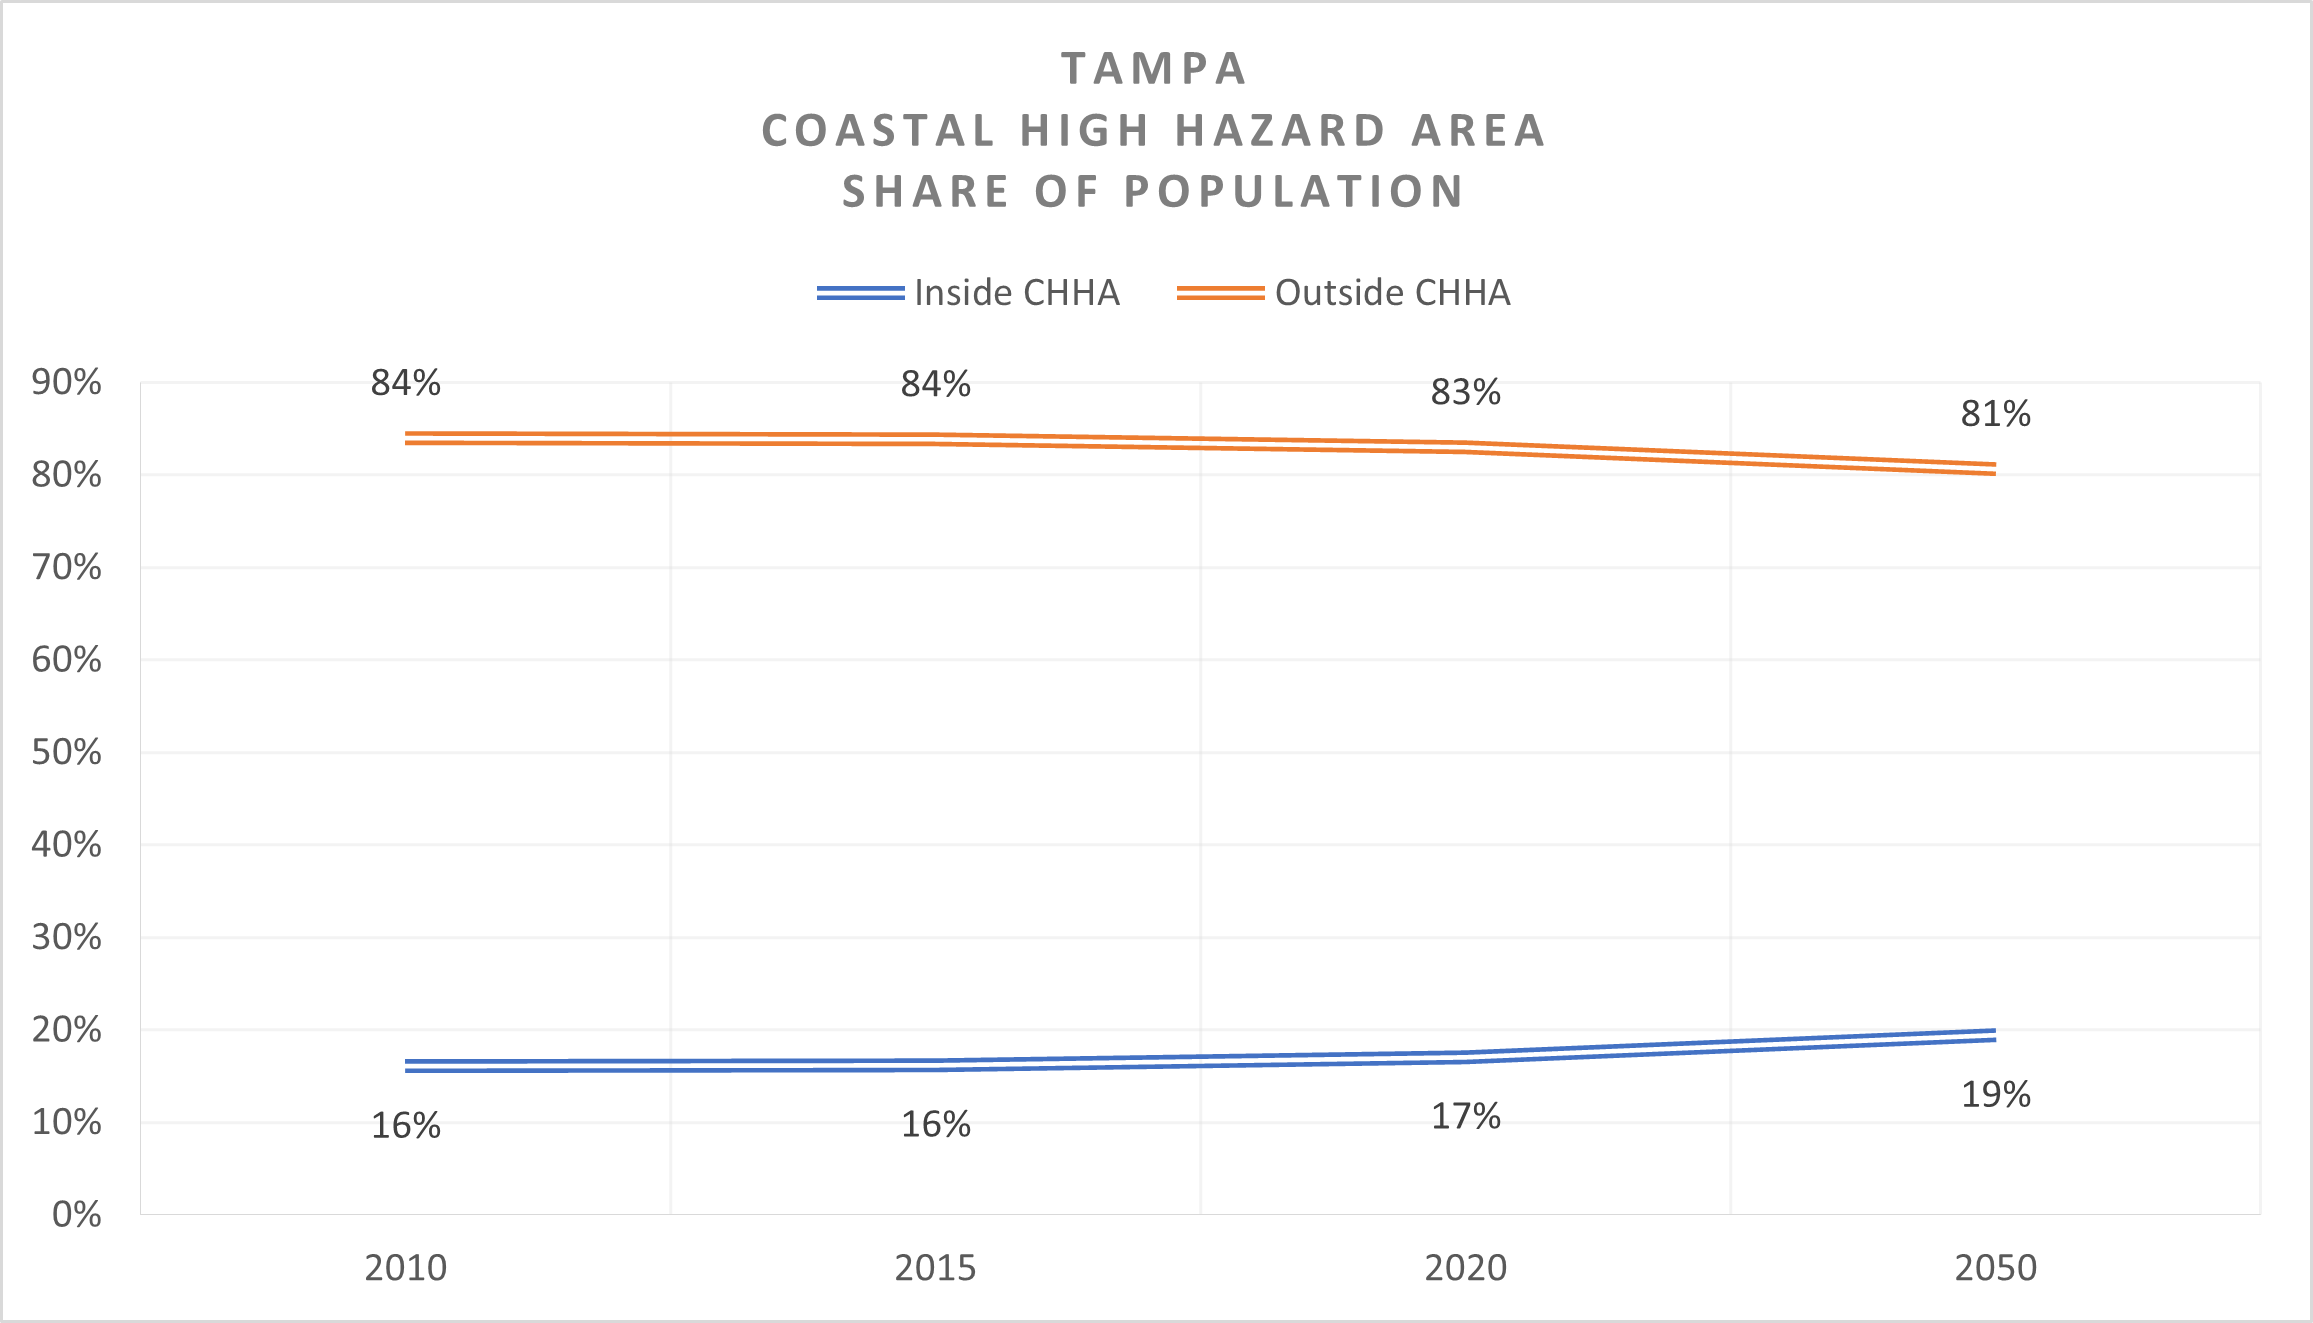 This chart shows Tampa's share of population inside and outside the CHHA. Currently, 17% of the population reside inside the CHHA and 83% of the population reside outside CHHA. By 2050, these shares are expected to change slightly. Namely, 19% of the population reside inside the CHHA and 81% of the county's population reside outside CHHA.